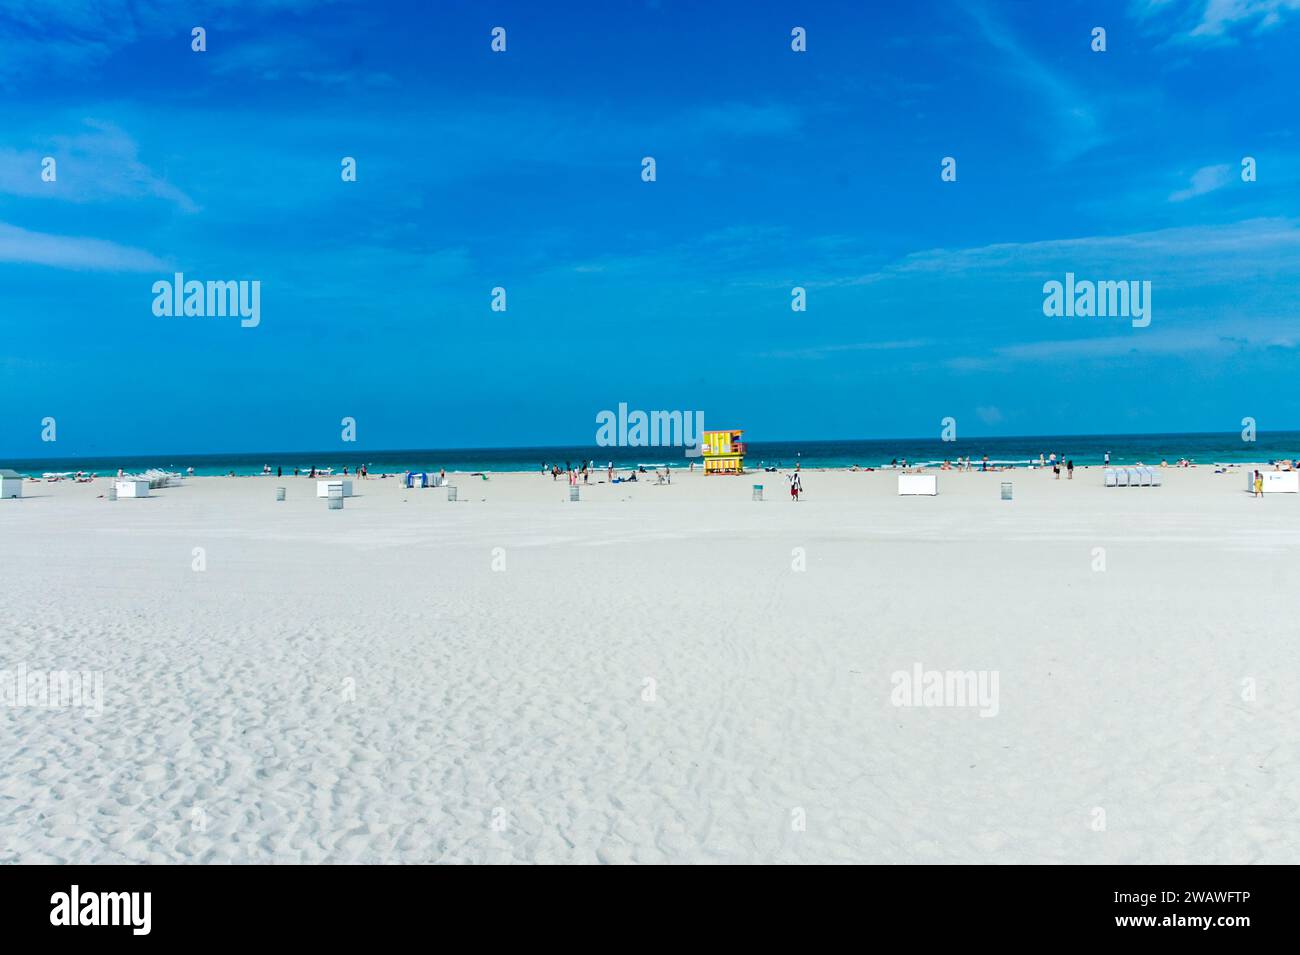 Discover Miami Beach, FL - Hotels, Condos, and Beachfront Delights. Explore Instagram-worthy spots, oceanfront condos, and iconic beaches in trendy Mi Stock Photo